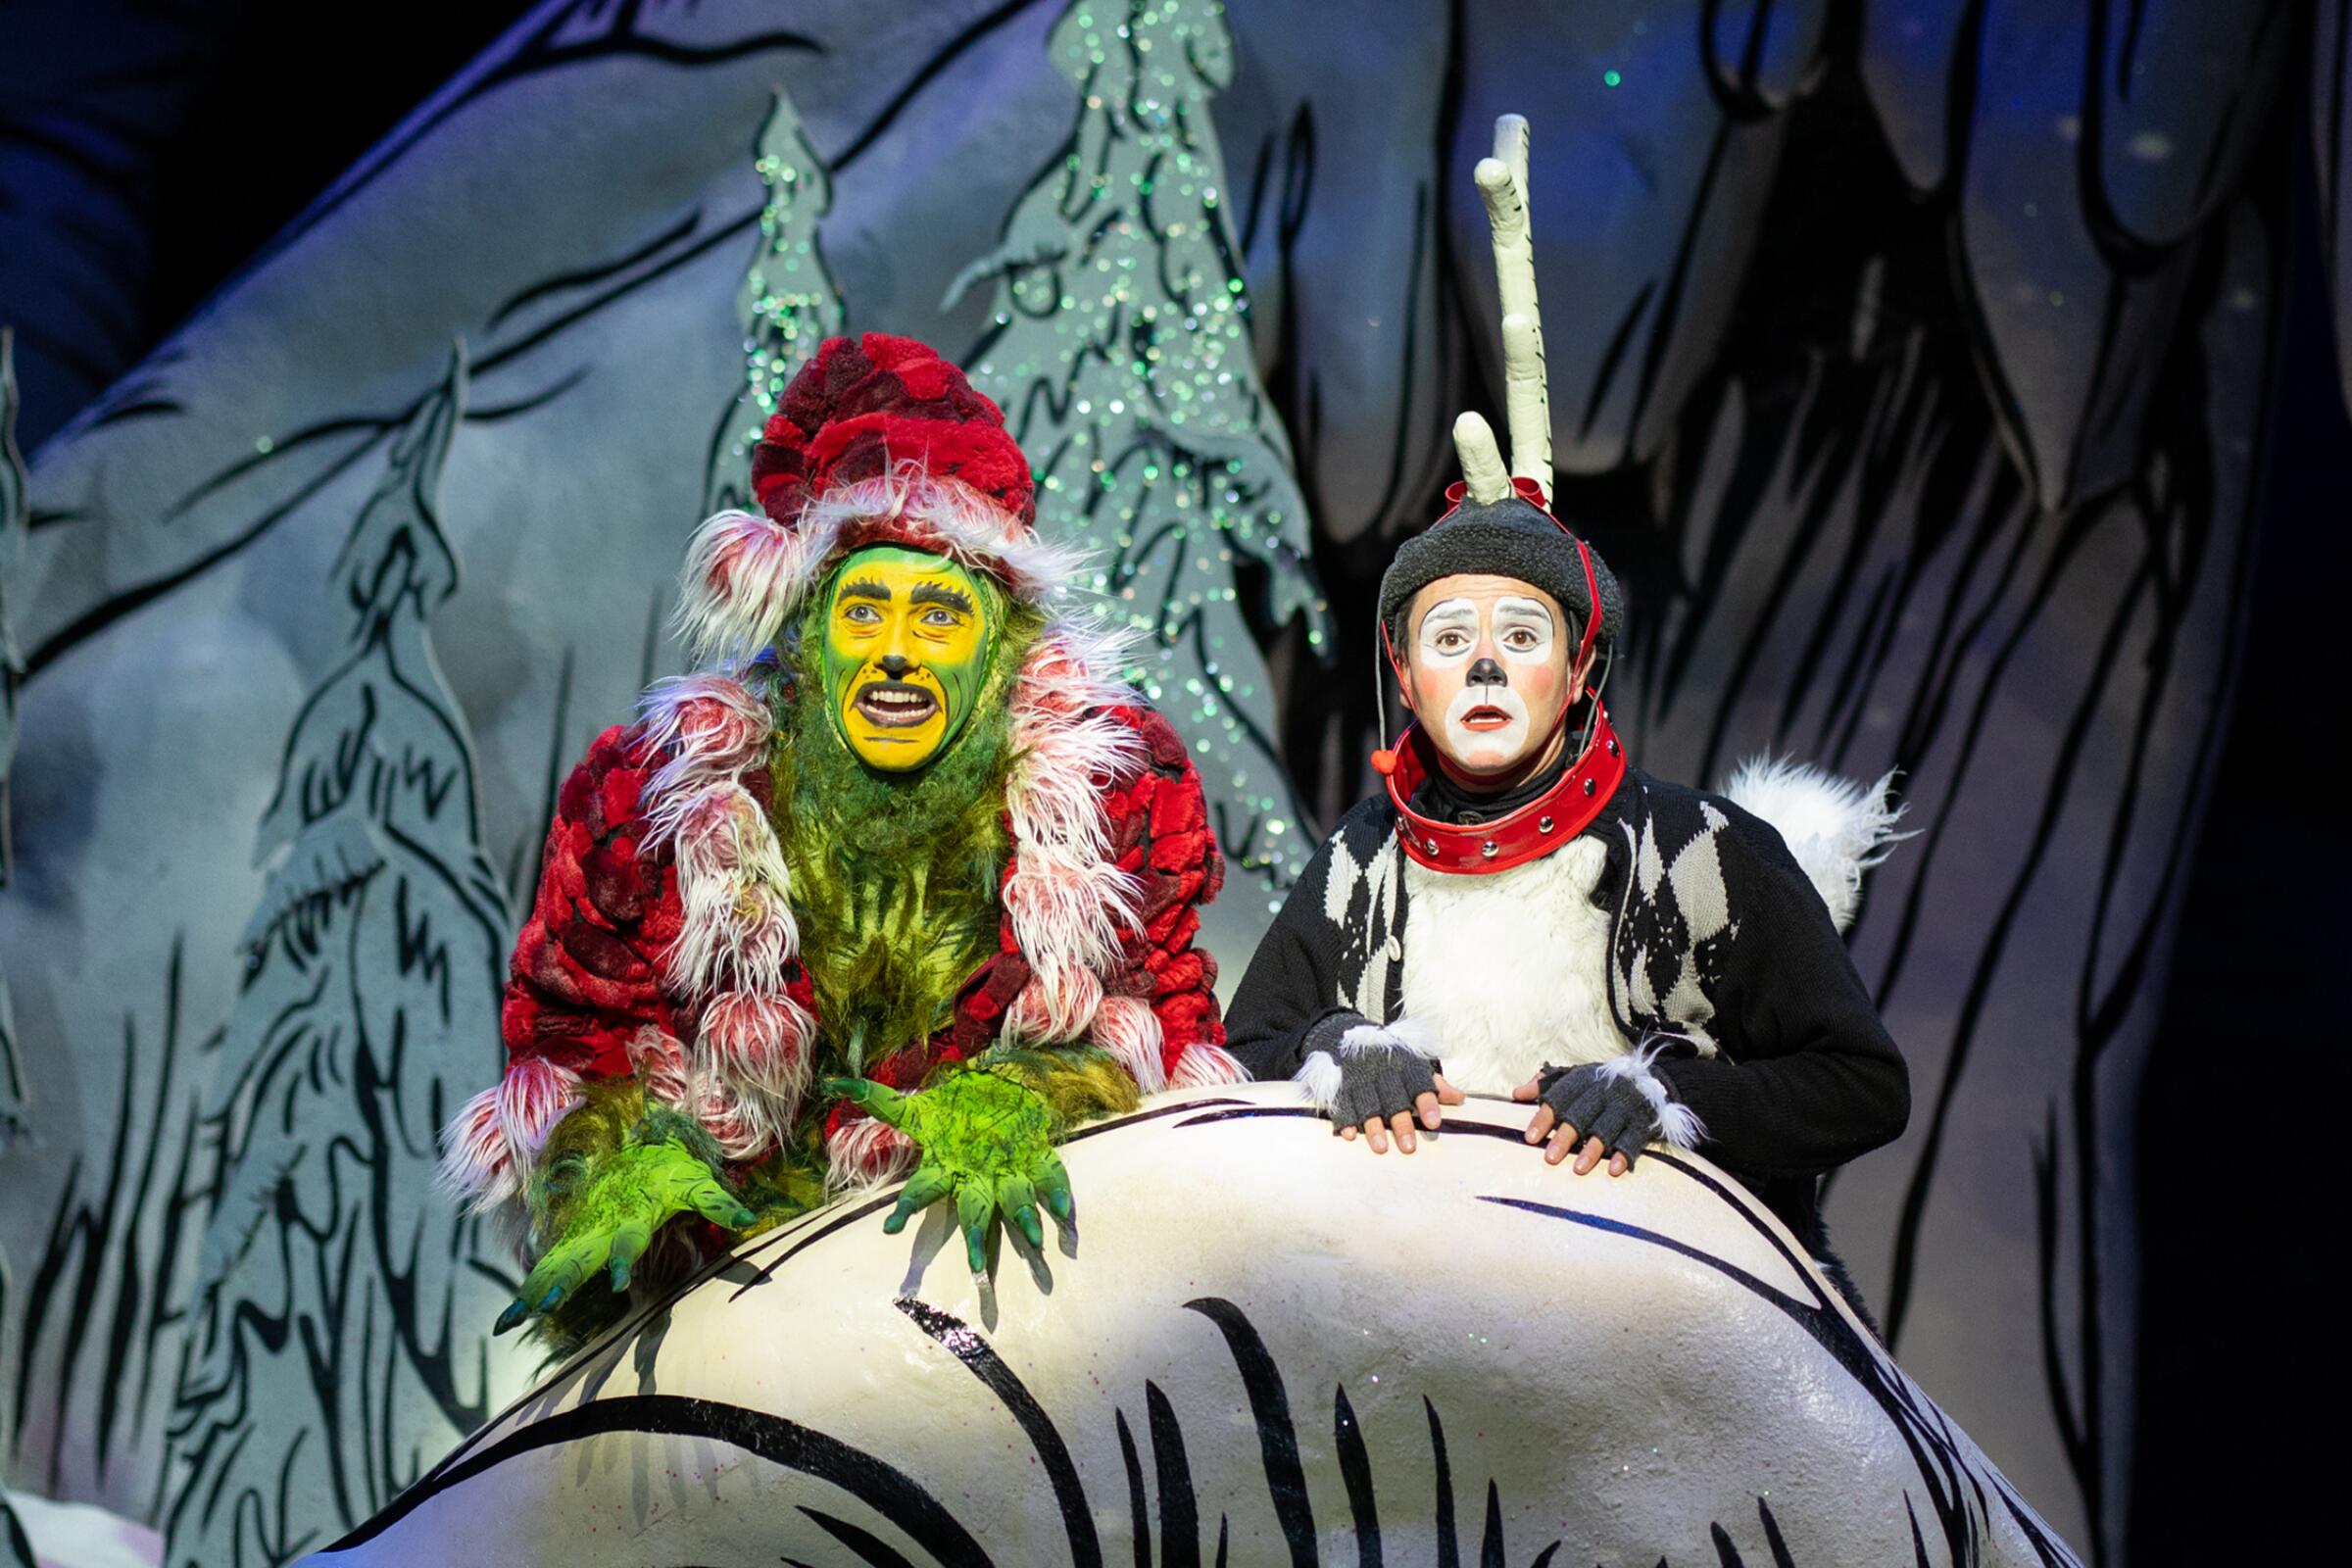 The Grinch and Young Maxi in the Old Globe's "Dr. Seuss's How the Grinch Stole Christmas!" in 2021.